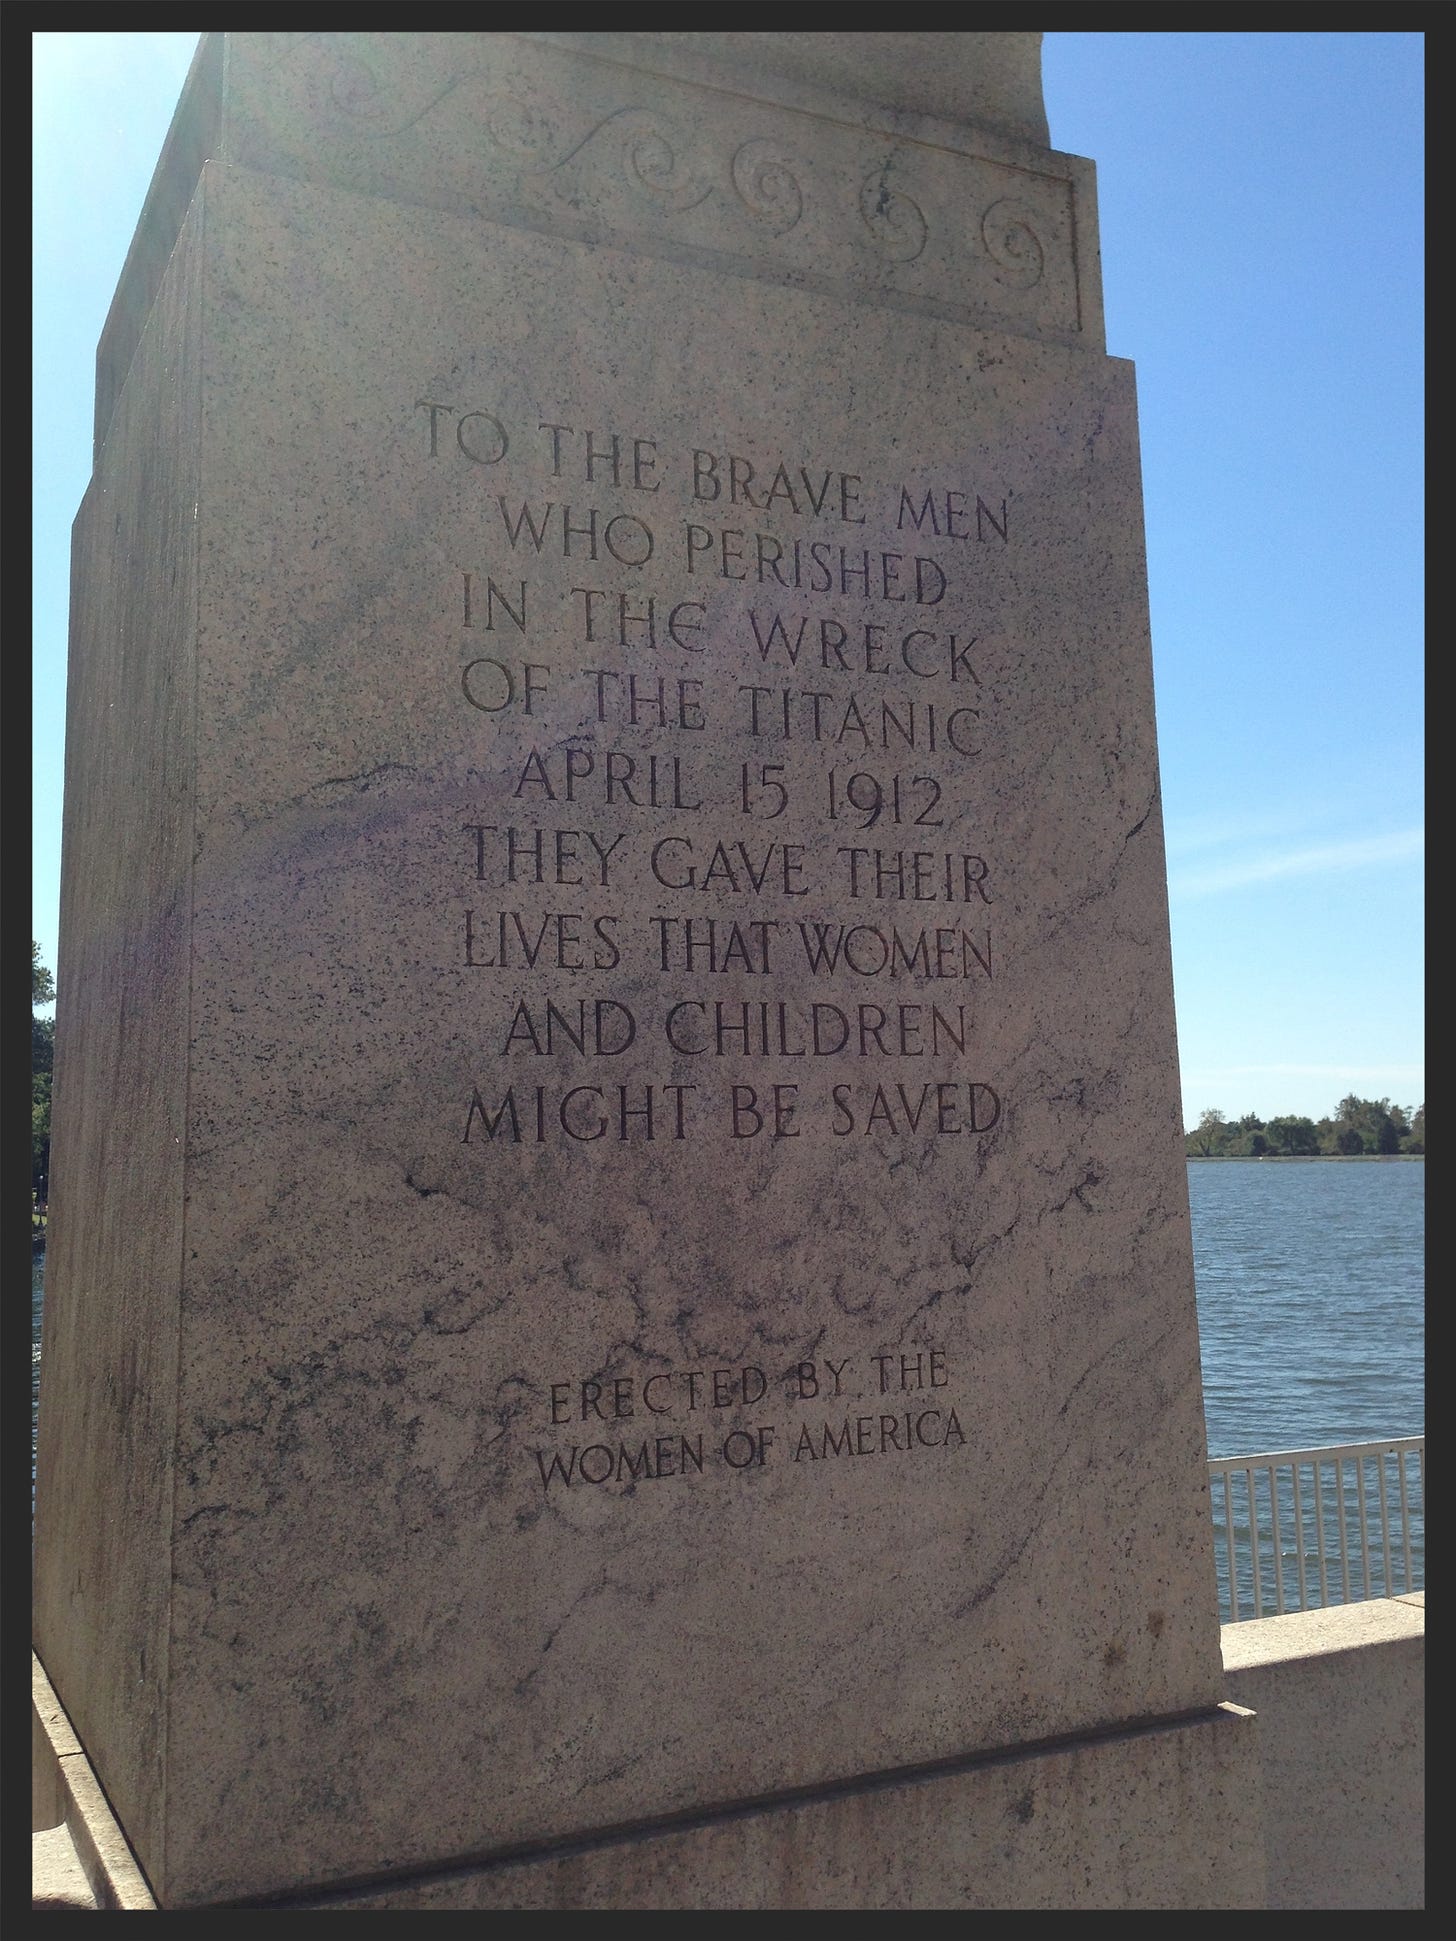 The inscription on the front side of the memorial.